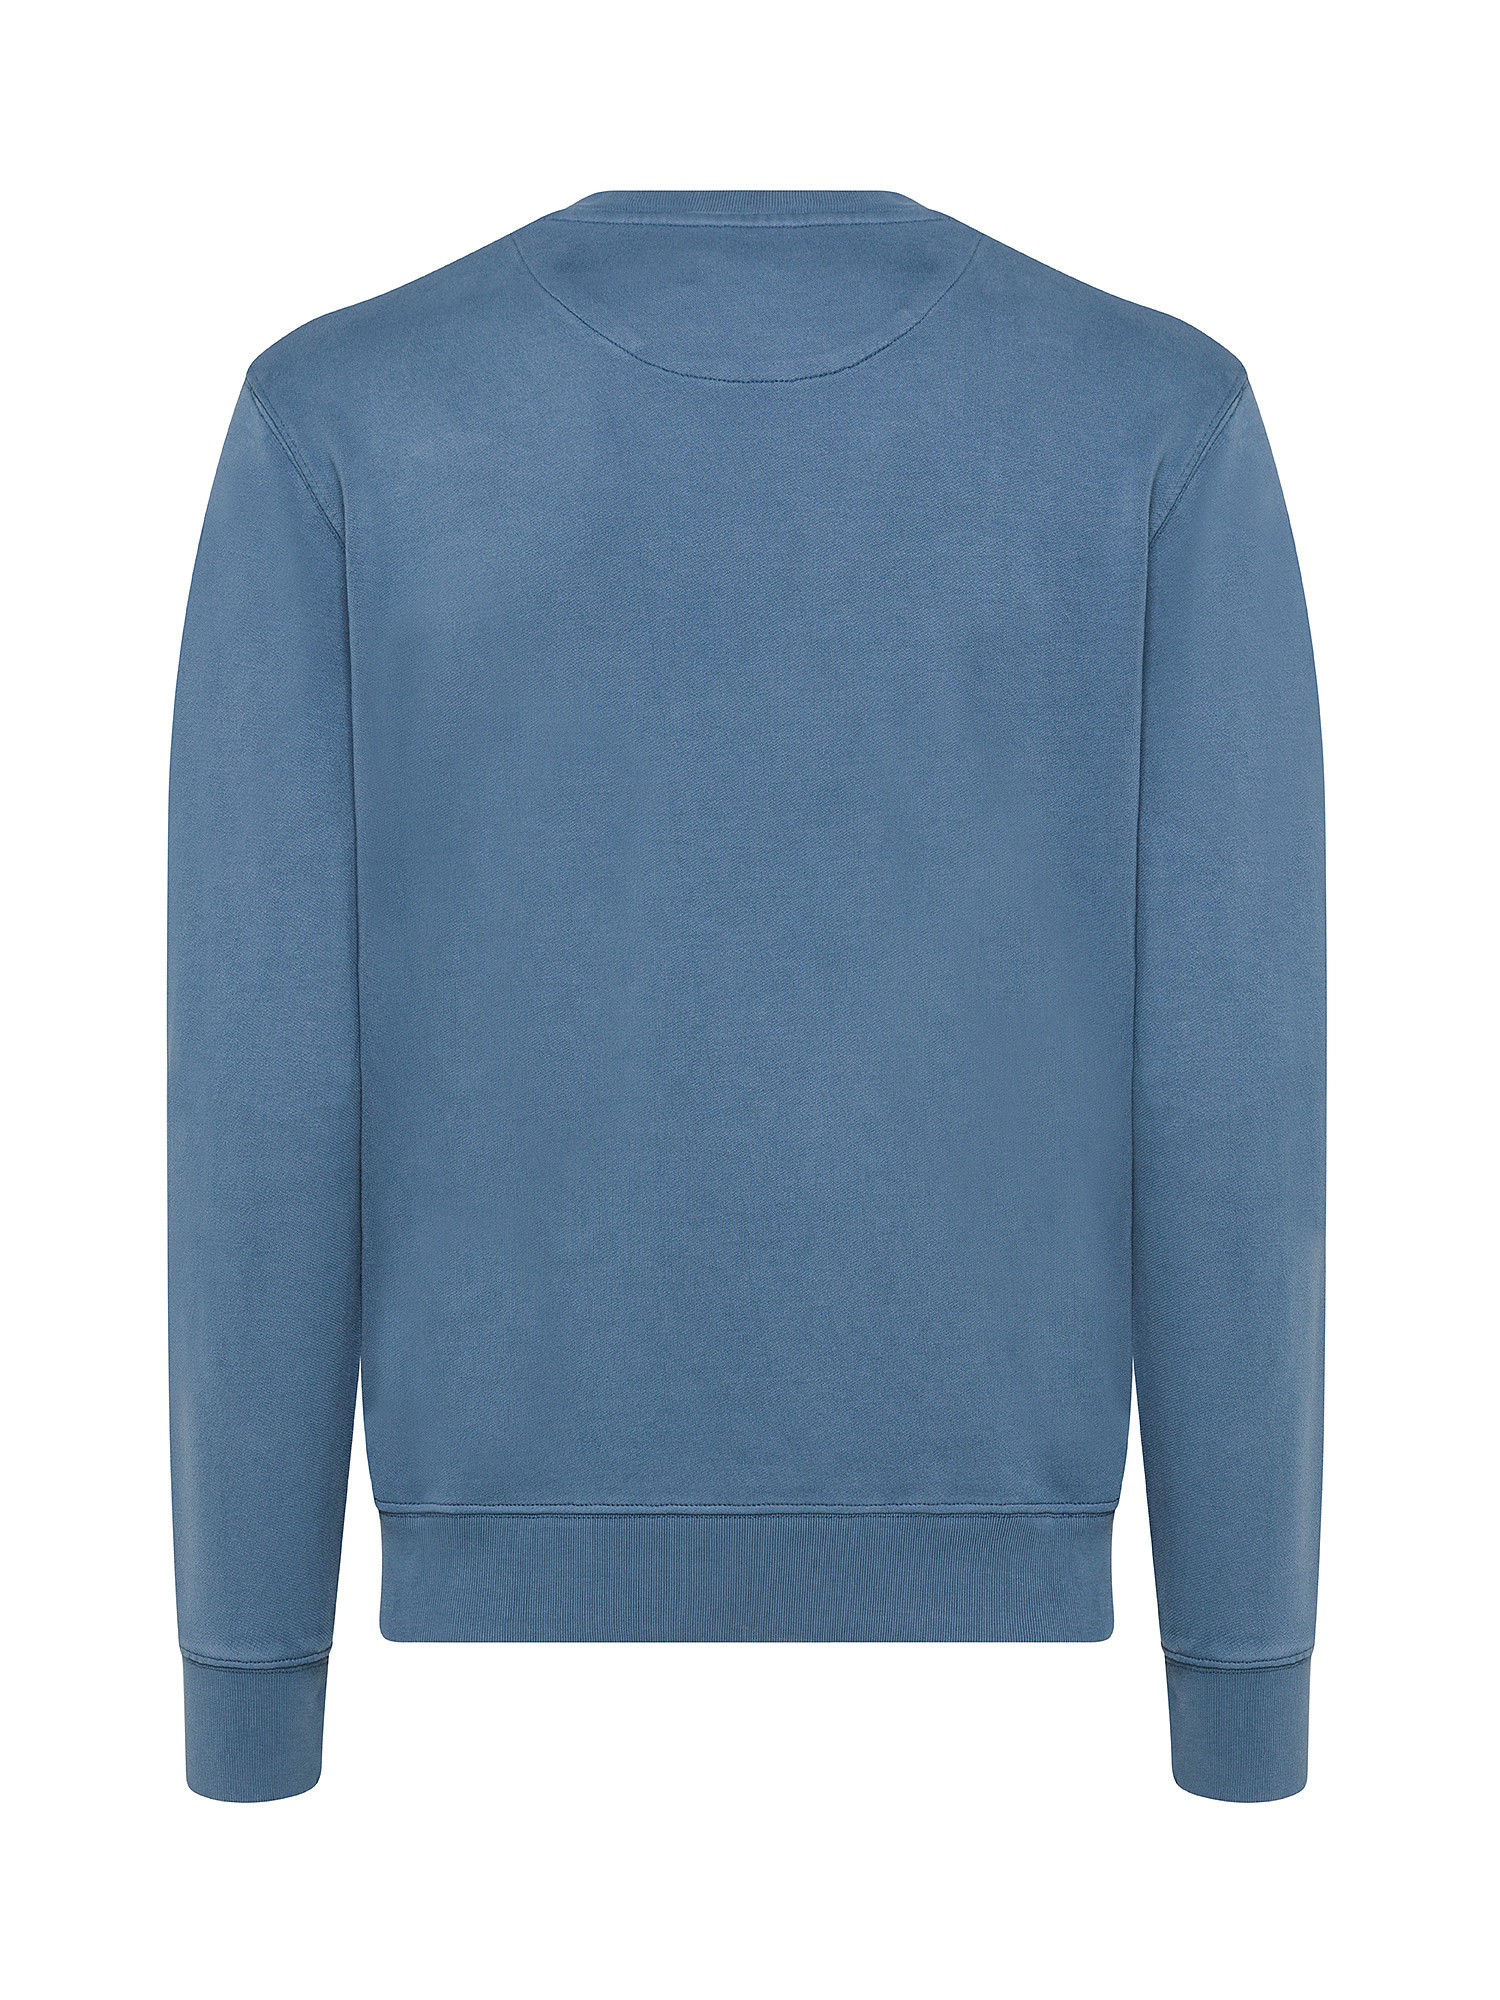 Pepe Jeans - Cotton sweatshirt with logo, Blue, large image number 1